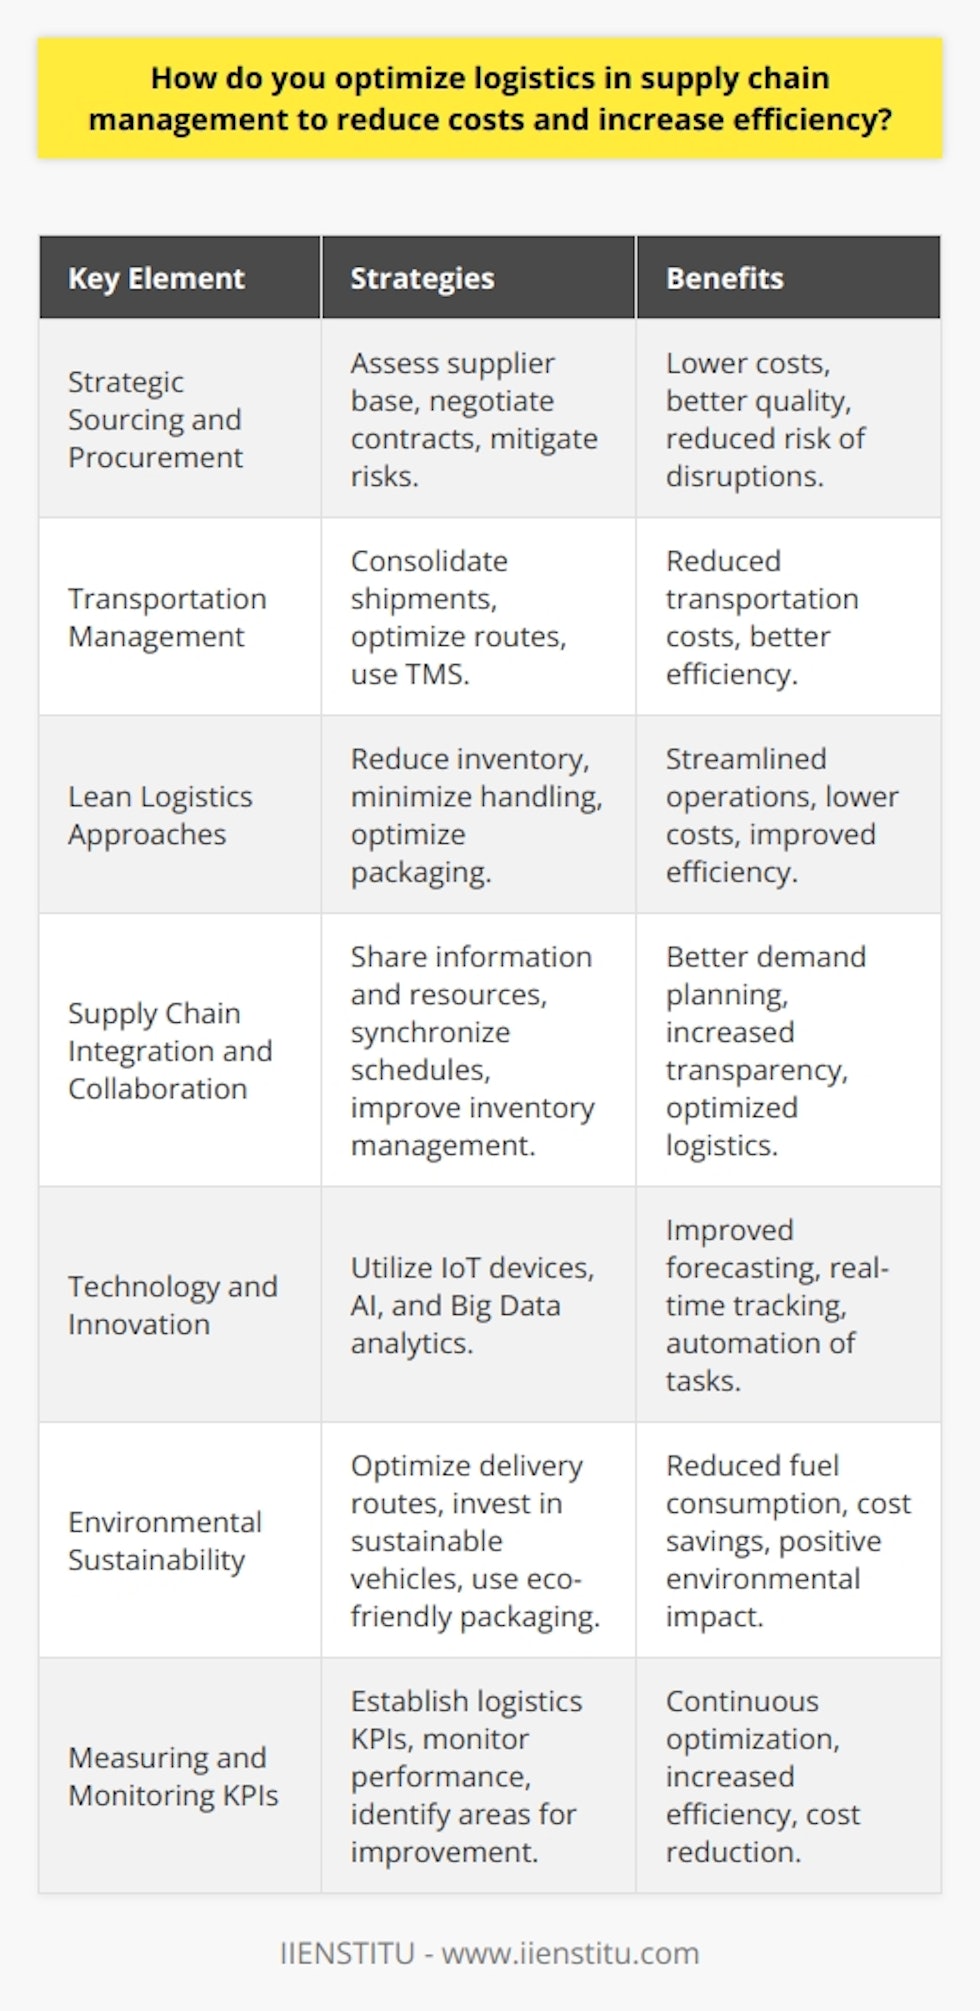 Optimizing logistics within supply chain management is a multifaceted endeavor that focuses on streamlining operations, reducing waste, and fostering collaborations to drive down costs and boost efficiency. Here's an approach that tackles key elements of logistics and supply chain management:Strategic Sourcing and ProcurementLocating reliable suppliers and negotiating beneficial contracts is at the core of strategic sourcing. This involves a comprehensive assessment of the supplier base to ensure raw materials are purchased at the best possible prices without compromising on quality. Effective sourcing strategies can mitigate risks such as price volatility and supply disruptions.Transportation ManagementTransportation, being a significant cost driver in supply chains, necessitates careful planning. By consolidating shipments, negotiating better freight rates, and optimizing routes, costs can be lowered. Additionally, the use of Transportation Management Systems (TMS) facilitates route optimization, load planning, and carrier management.Lean Logistics ApproachesEmbracing lean logistics principles can eliminate inefficiencies in the supply chain. This involves reducing excess inventory, minimizing handling, and curbing transportation costs through more efficient packaging or consolidation strategies. The goal is to create a lean operation where each step adds value without incurring unnecessary expense or time.Supply Chain Integration and CollaborationEffective collaboration between all members of the supply chain creates a more synchronized and transparent logistics operation. Sharing information and resources with suppliers, distributors, and customers can lead to more accurate demand planning, synchronized production scheduling, and improved inventory management.Technology and InnovationInvestment in advanced technologies such as IoT (Internet of Things) devices, AI (Artificial Intelligence), and Big Data analytics can streamline logistics operations. These tools enable better demand forecasting, real-time tracking, and automation of routine tasks, which collectively reduce costs and enhance efficiency.Environmental SustainabilitySustainable logistics practices aren't just good for the planet; they often result in long-term cost savings. Such practices include optimizing delivery routes to reduce fuel consumption, investing in fuel-efficient or electric vehicles, and ensuring that packaging materials are recyclable and environmentally friendly.Measuring and Monitoring KPIsEstablish Key Performance Indicators (KPIs) related to logistics efficiency, such as order accuracy, delivery times, and transportation costs, to monitor performance. Consistent evaluation of these metrics can highlight areas that need improvement and help maintain an optimized logistic operation within the supply chain.By considering these key strategies and continuously adapting to innovative practices, companies can achieve optimized logistics and a supply chain that is both cost-effective and efficient. It requires a structured approach that evaluates each component of the supply chain and seeks ways to streamline and improve operations at every juncture.